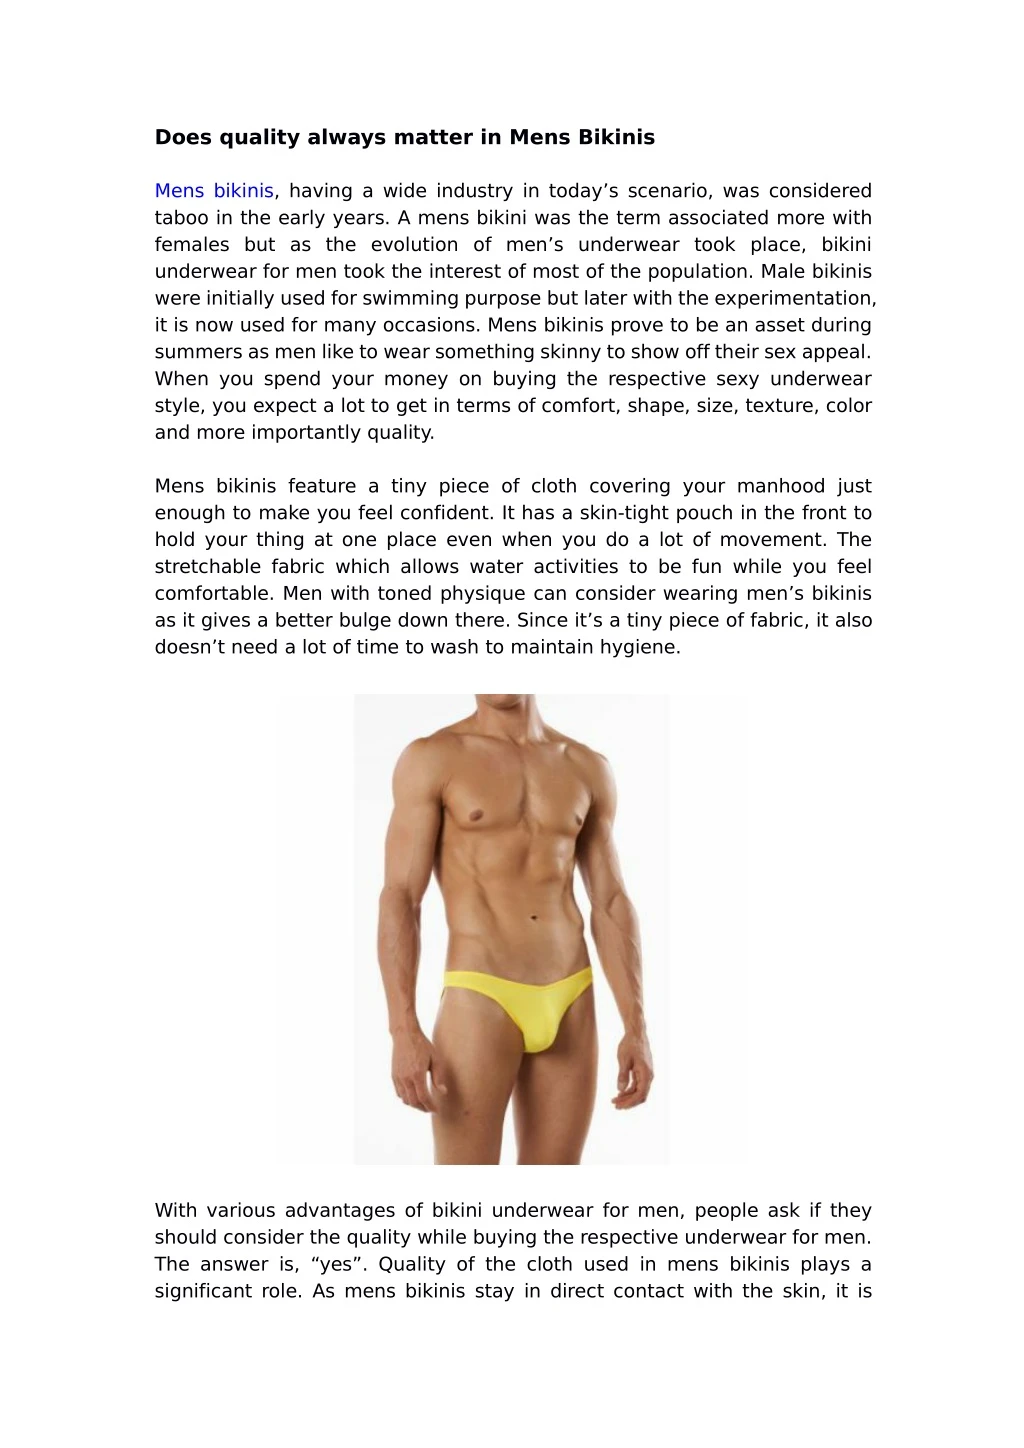 does quality always matter in mens bikinis